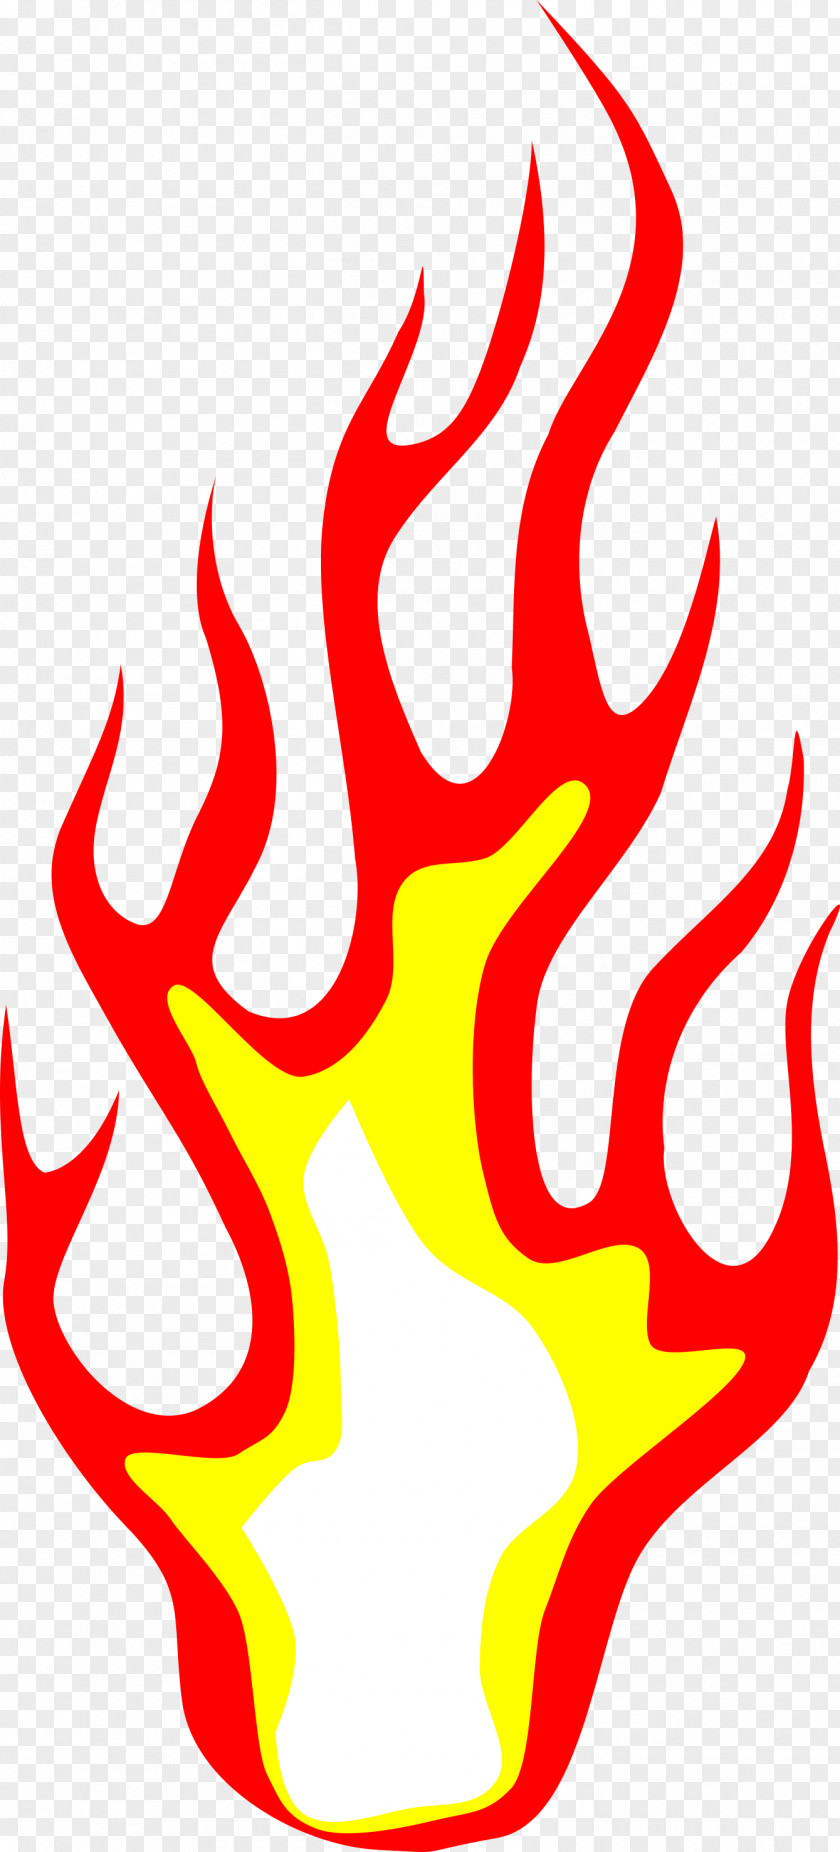 Animated Flame Clip Art Image PNG